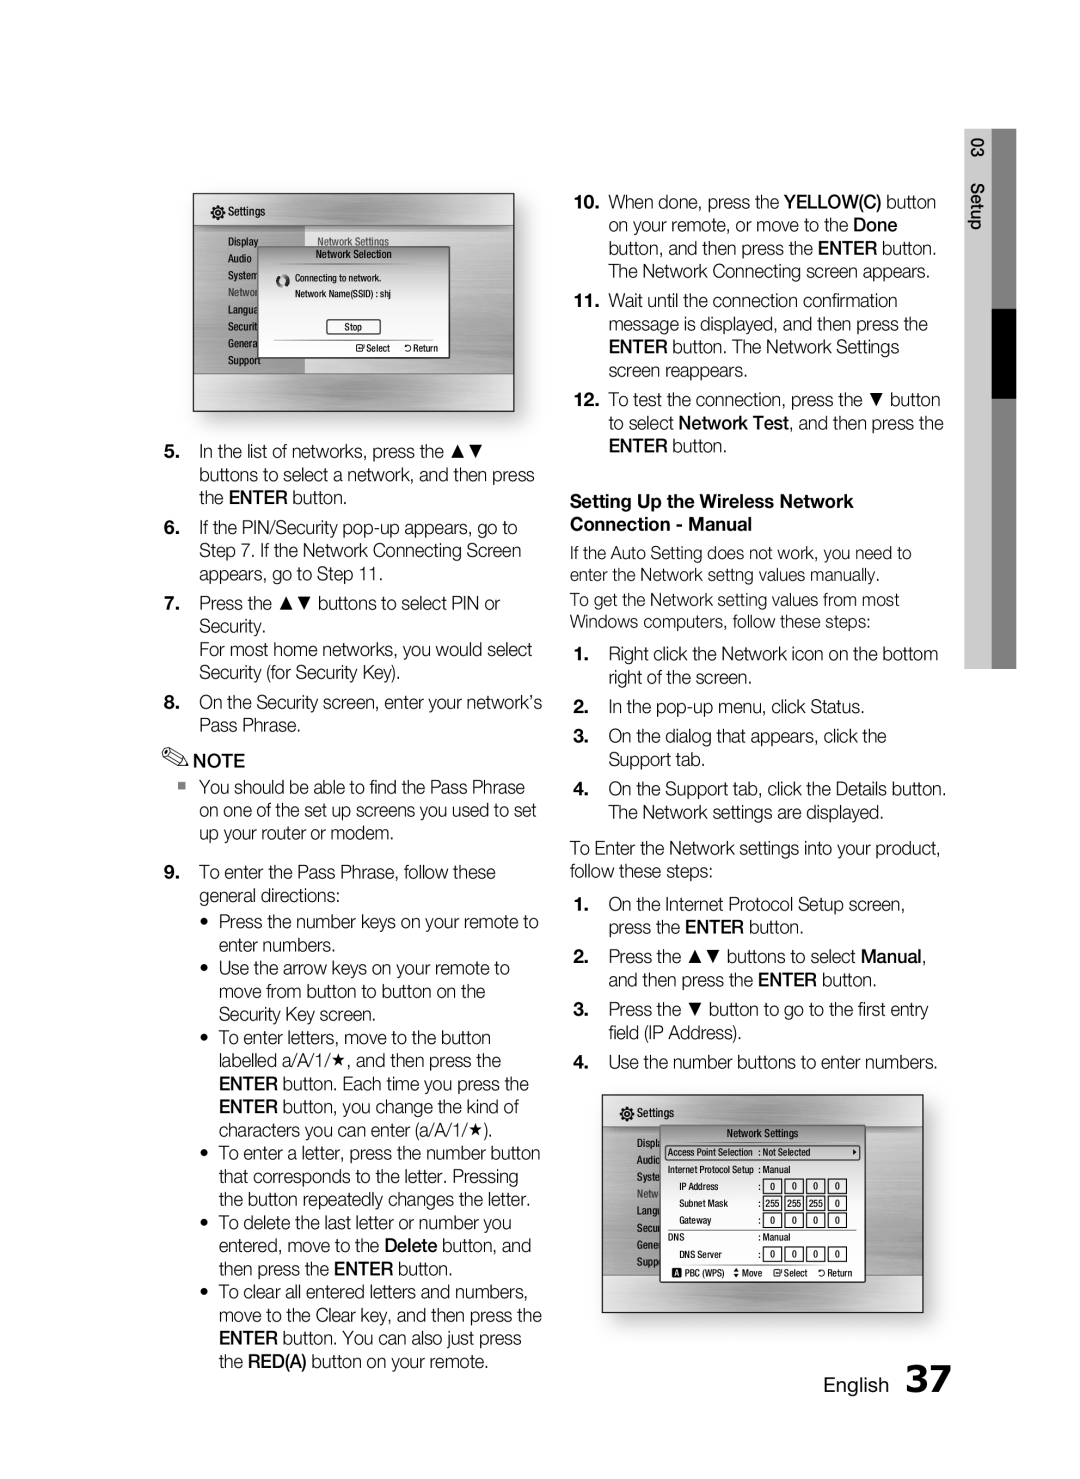 Samsung HT-C7300/XEN, HT-C7300/EDC manual Setting Up the Wireless Network Connection - Manual, English, Network Settings 